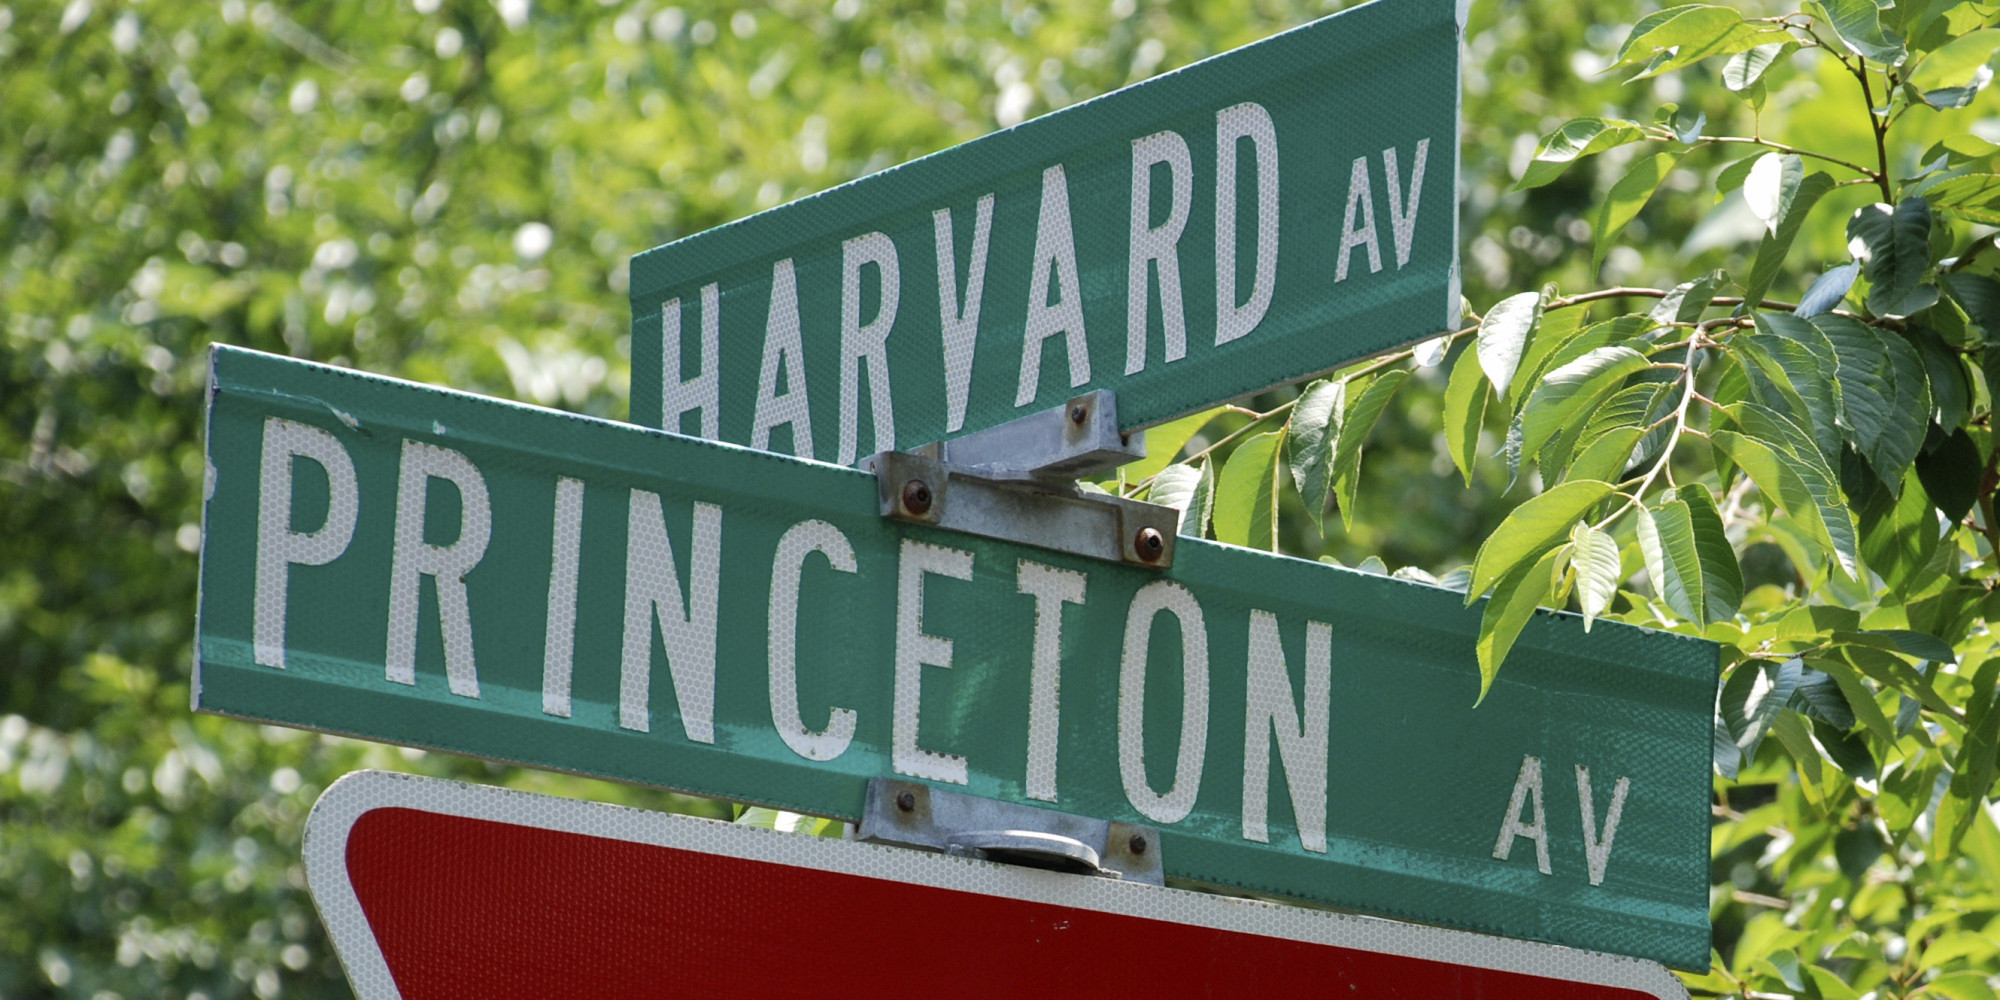 Sign of Harvard and Princeton Ave